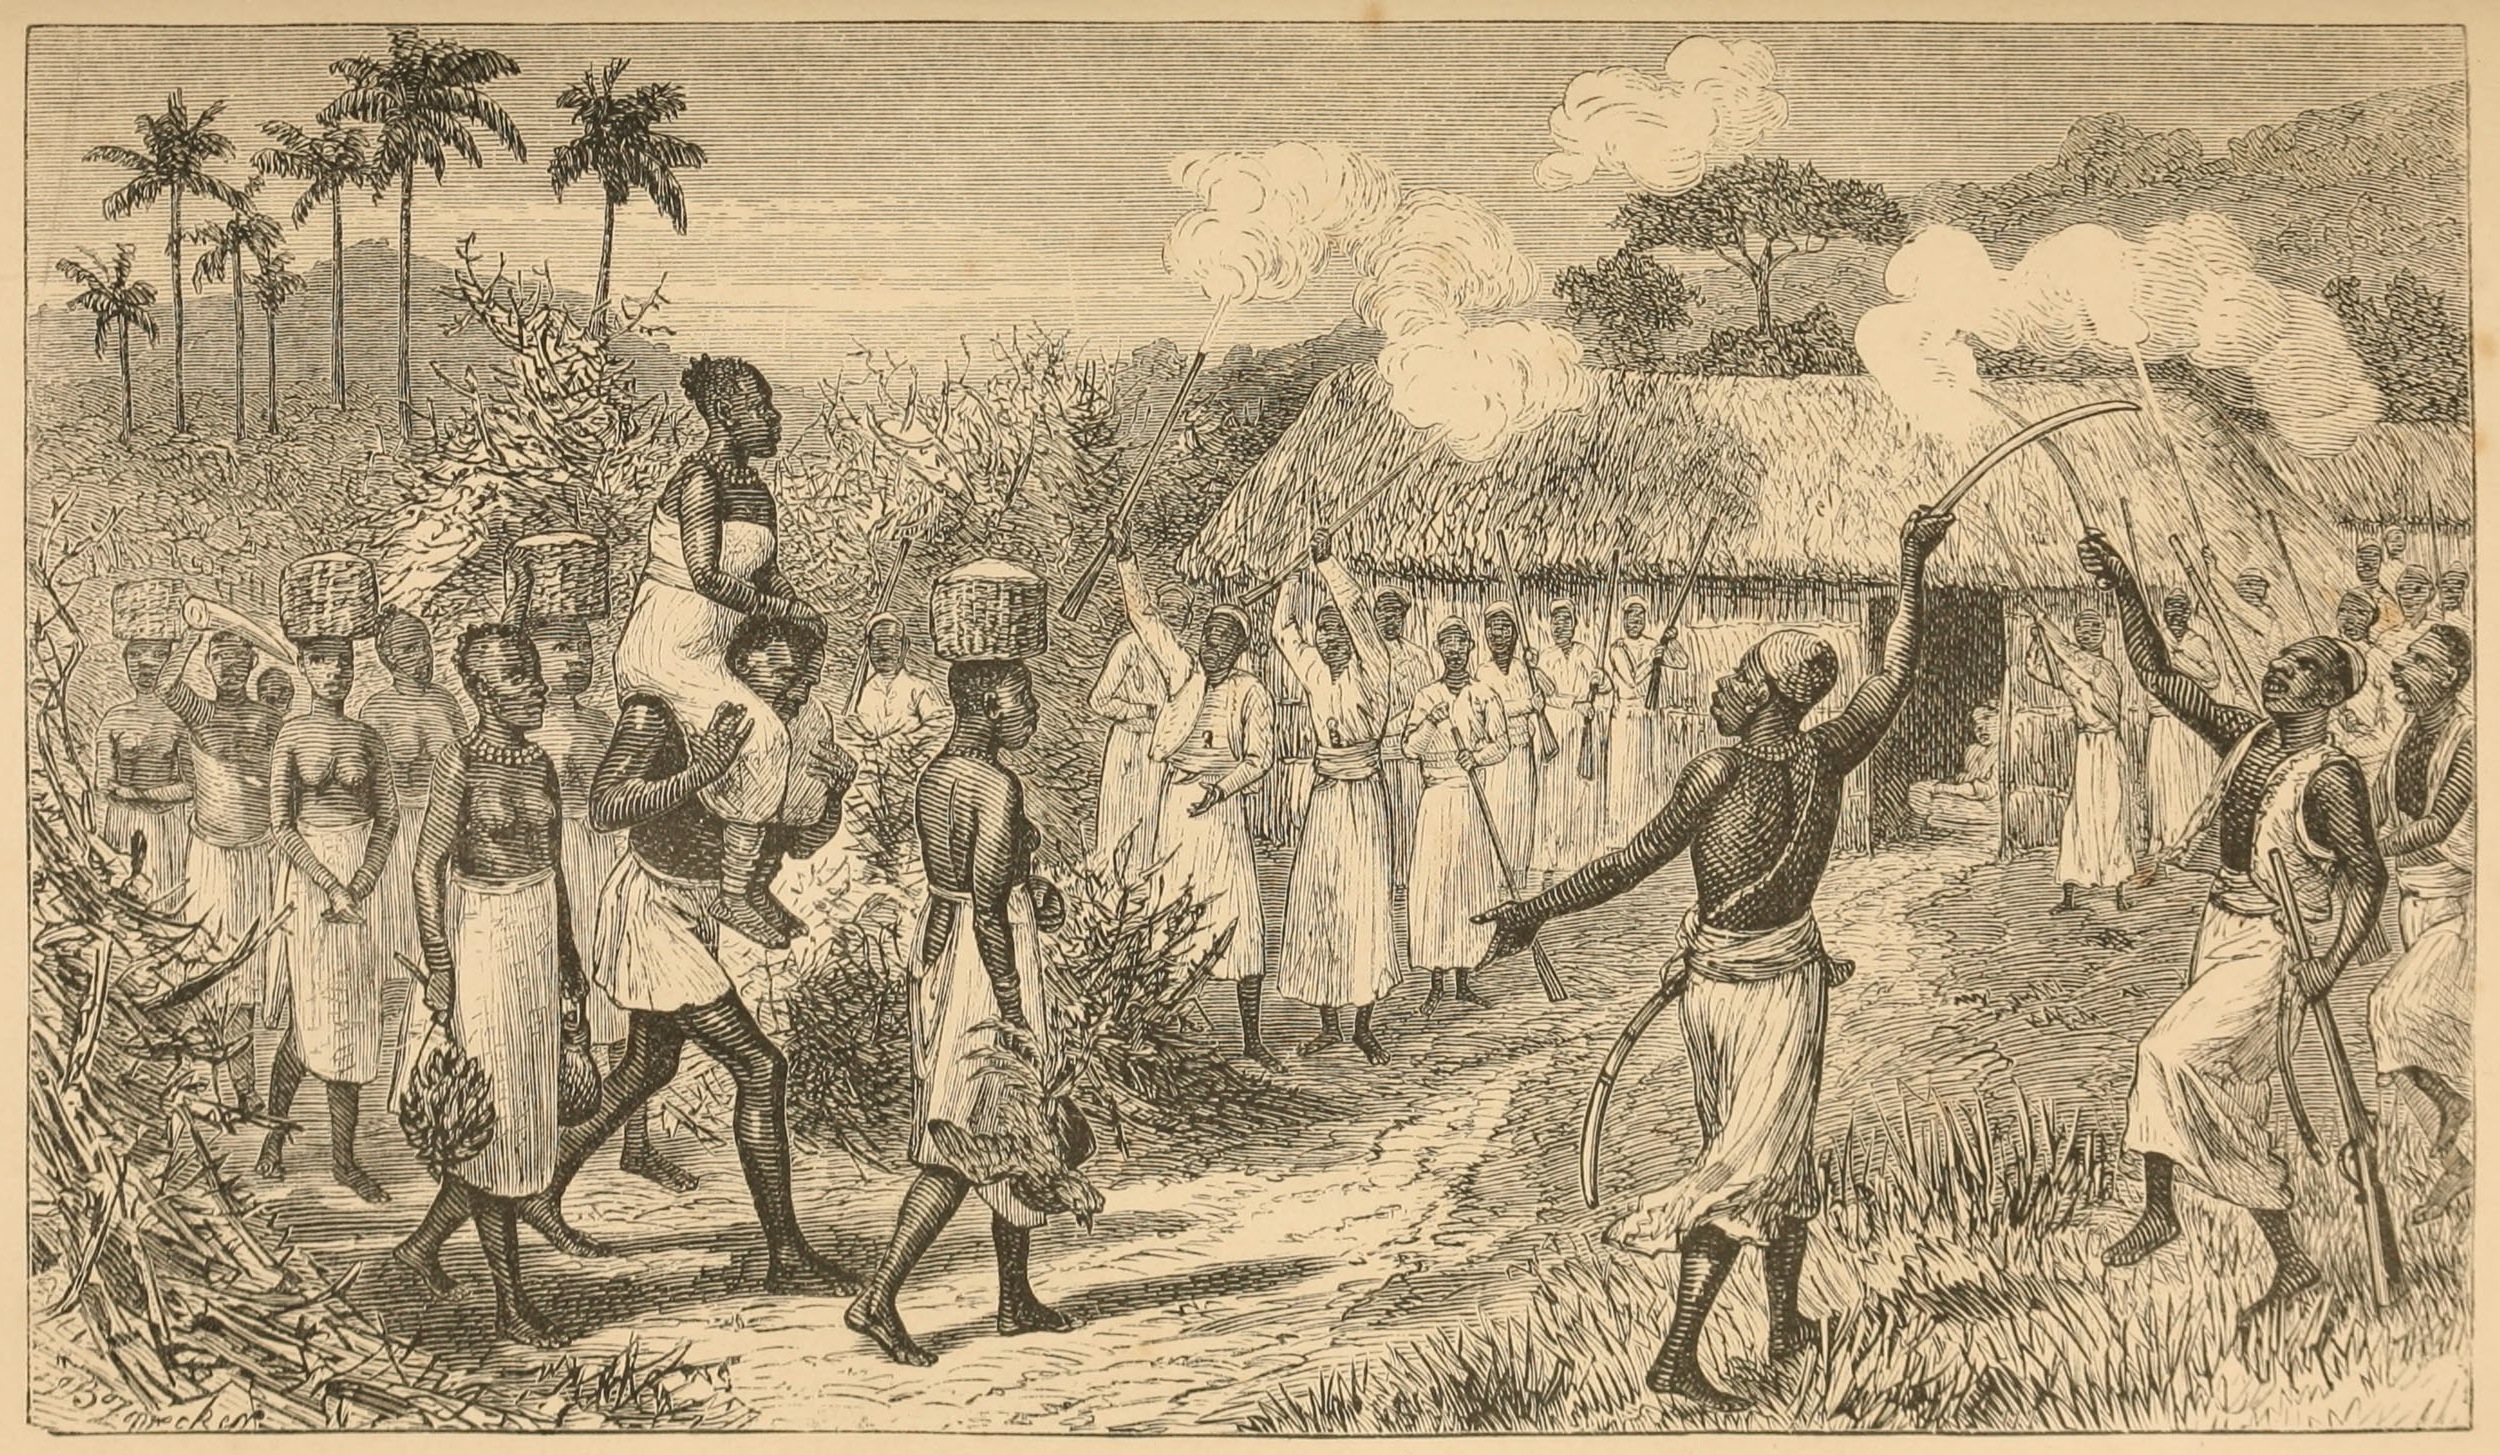 The Arrival of Hamees' Bride. Illustration from the Last Journals (Livingstone 1874,1:opposite 232). Courtesy of Internet Archive